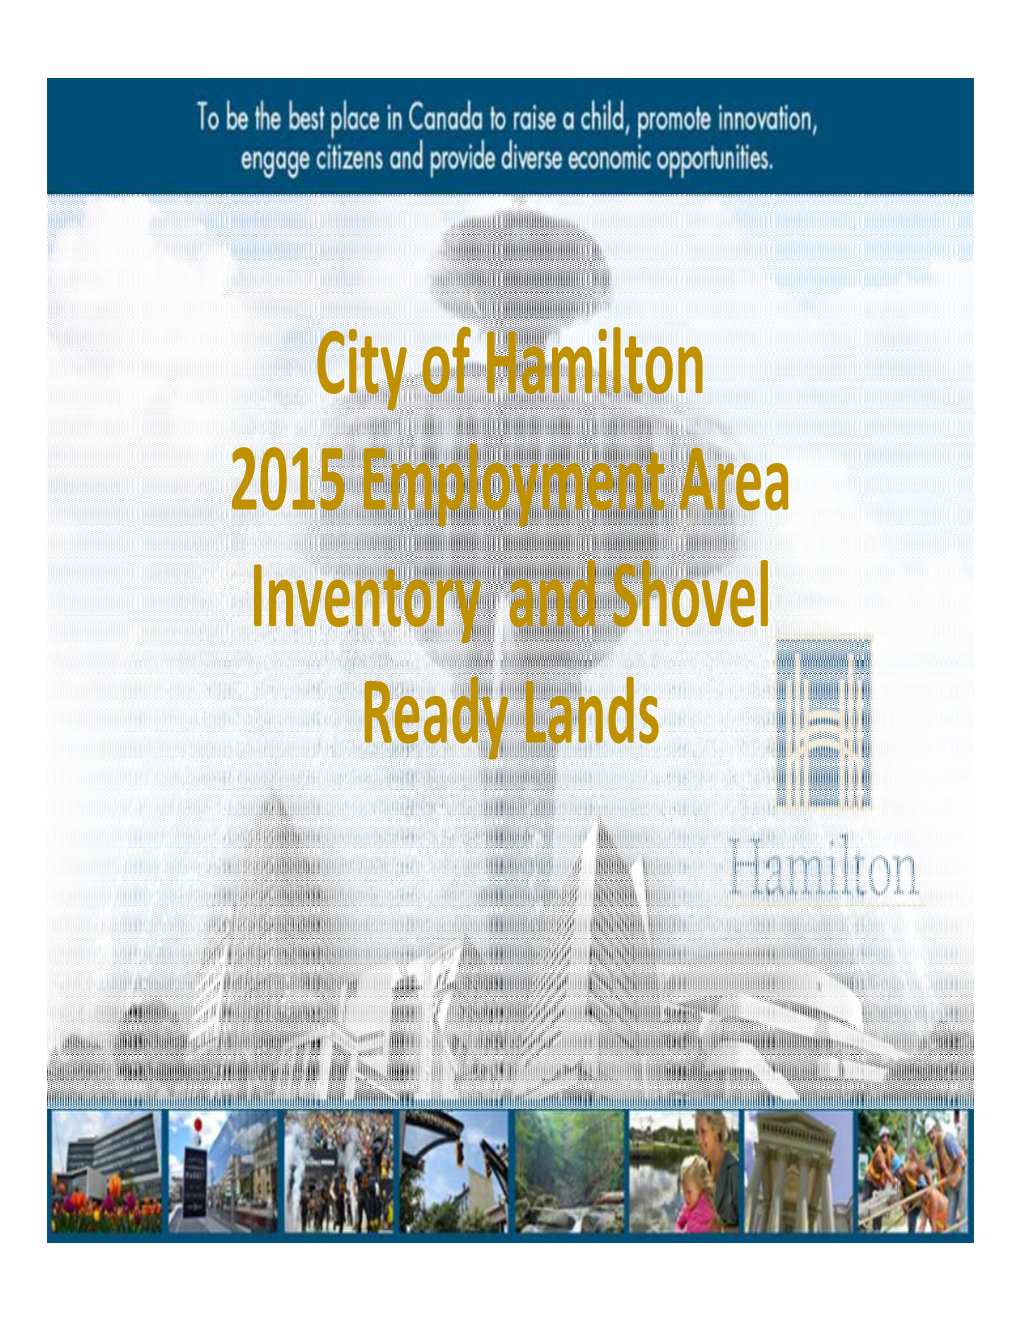 City of Hamilton 2015 Employment Area Inventory and Shovel Ready Lands